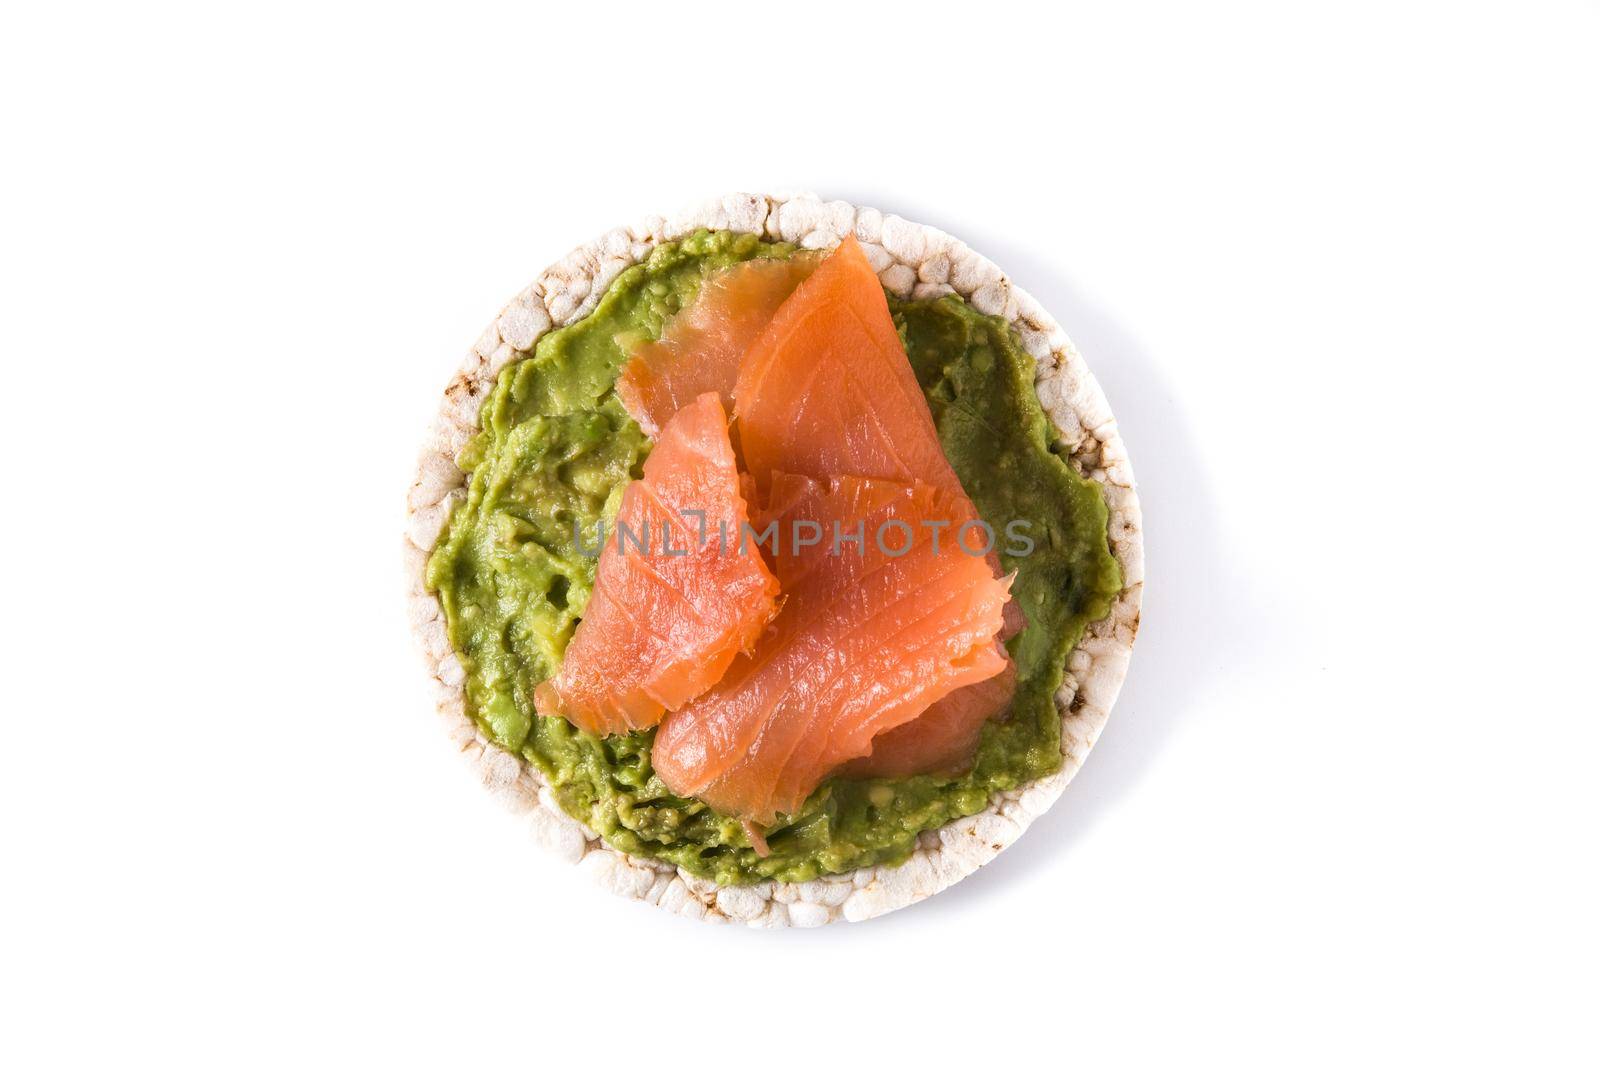 Puffed rice cake with guacamole and salmon isolated on white background